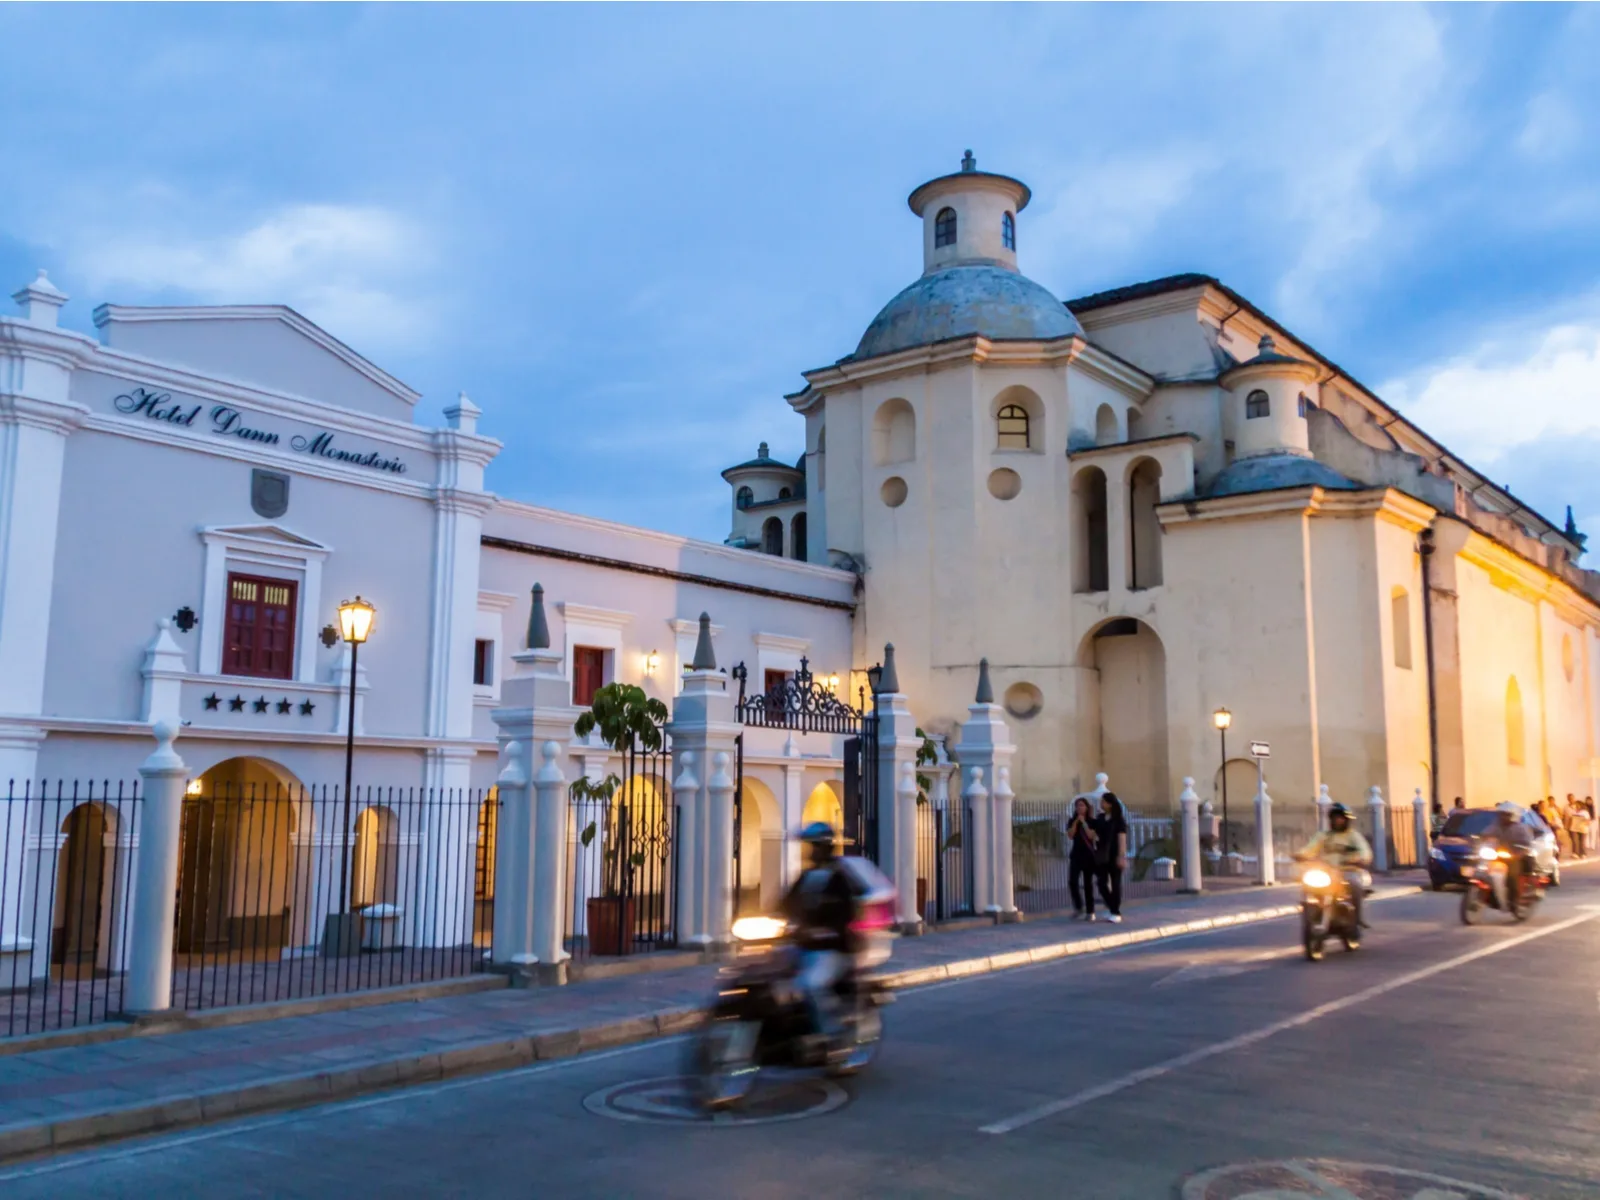 San Francisco church in colonial city Popayan, Colombia for a post titled Is Colombia Safe